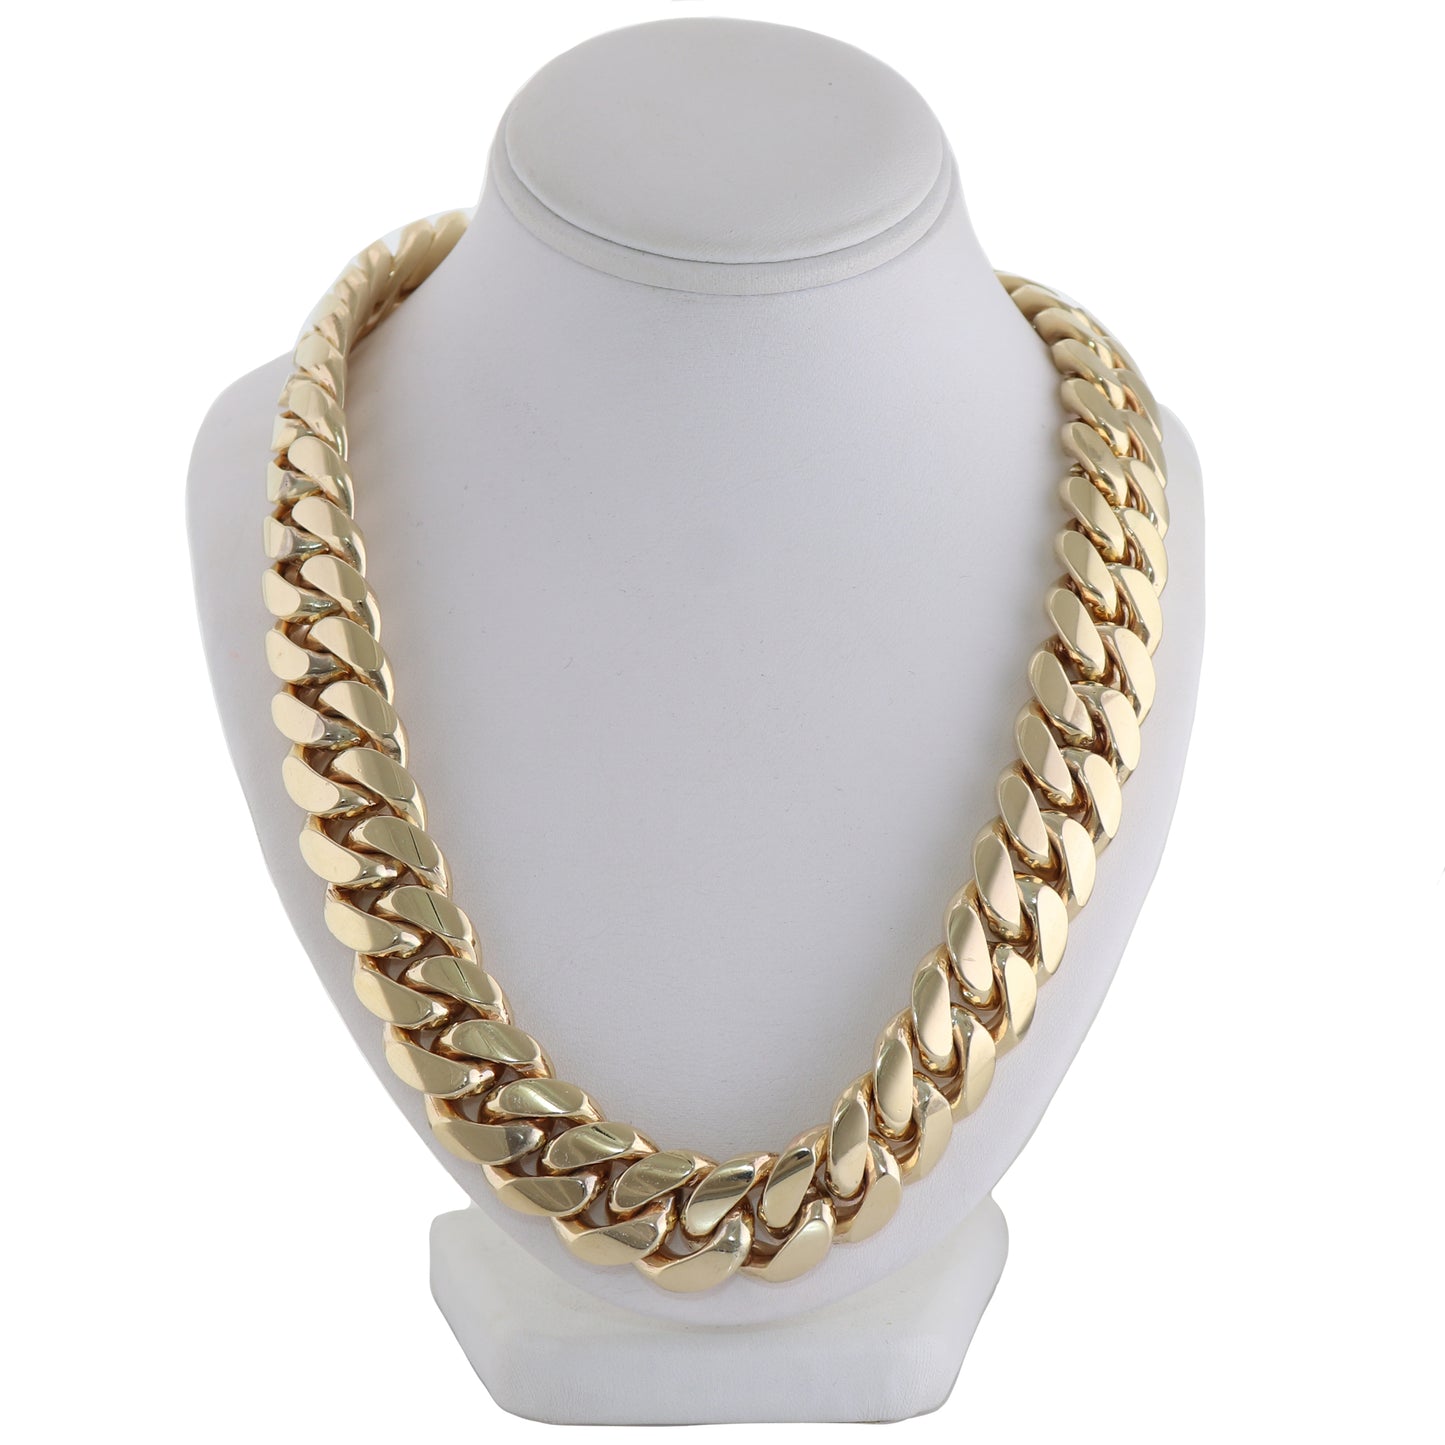 551g Men's 14k Yellow Gold Solid Cuban Chain Link 21" Necklace